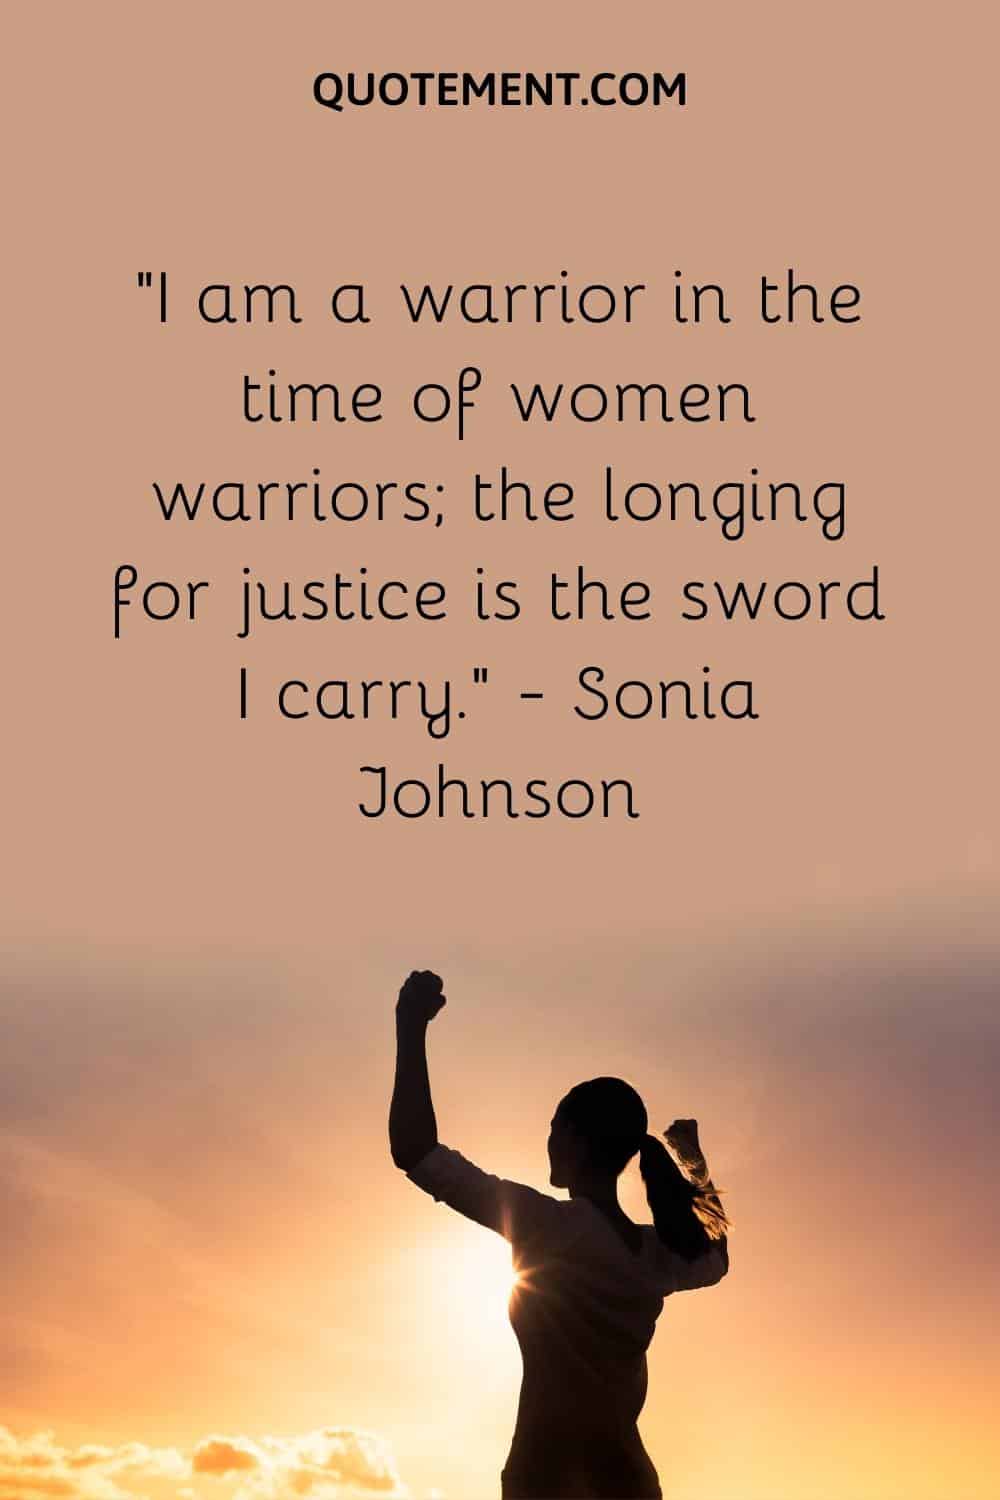 I am a warrior in the time of women warriors; the longing for justice is the sword I carry